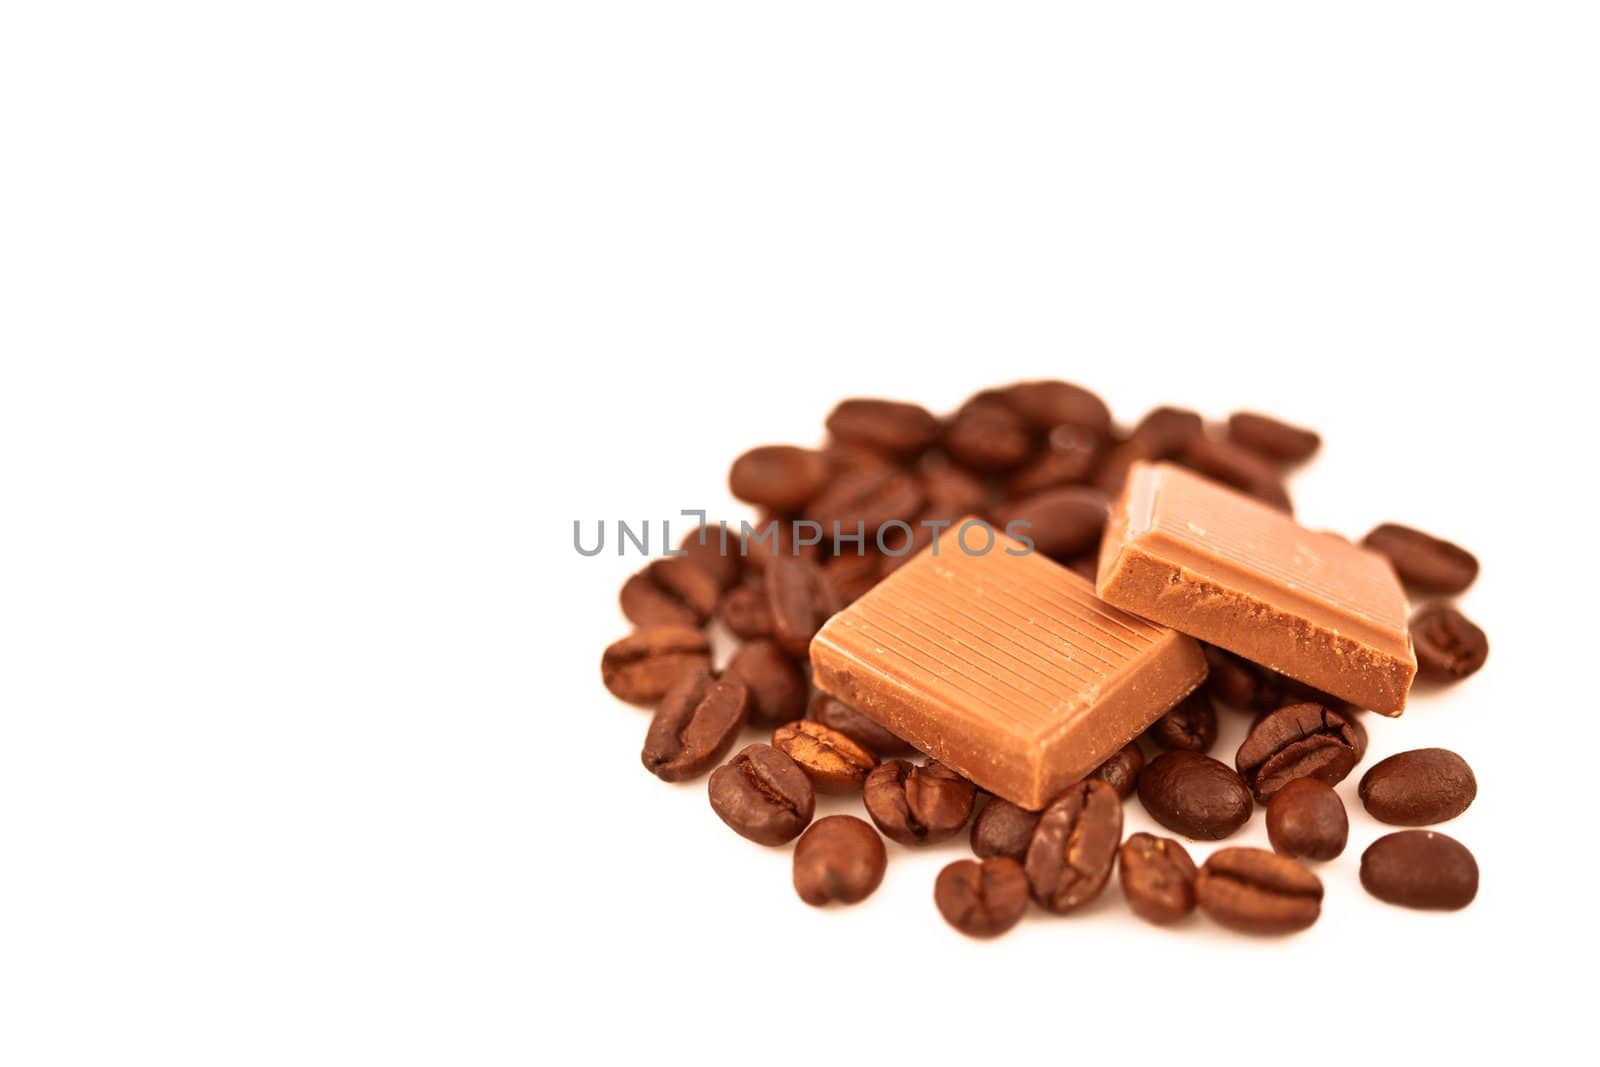 Two pieces of chocolate on coffee seeds against a white background